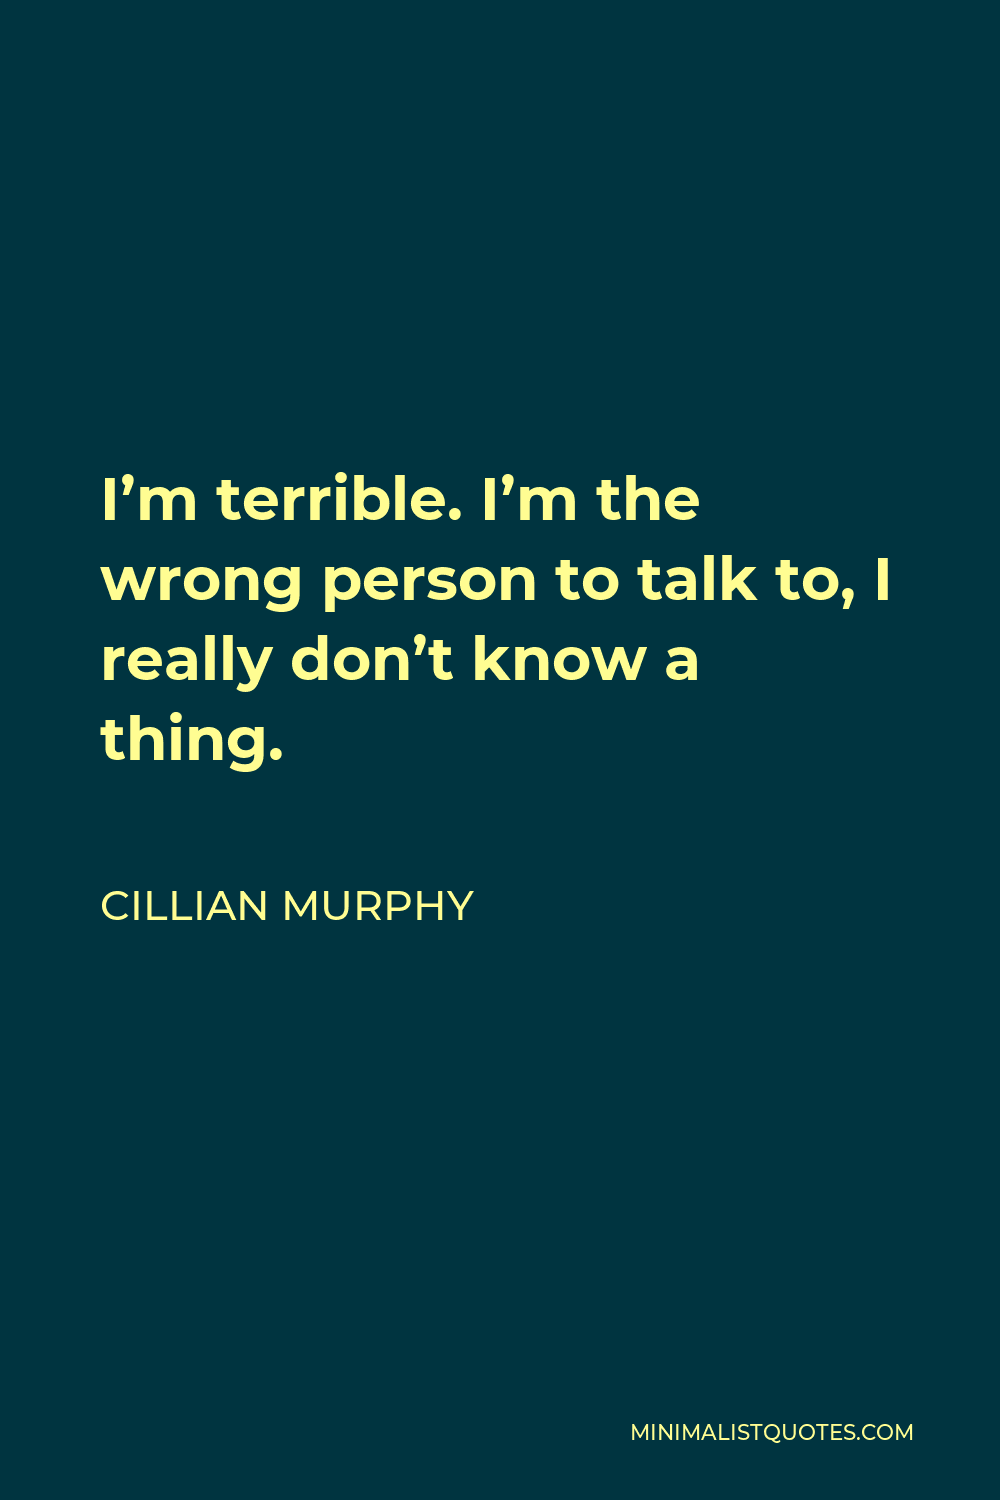 Cillian Murphy Quote - I’m terrible. I’m the wrong person to talk to, I really don’t know a thing.